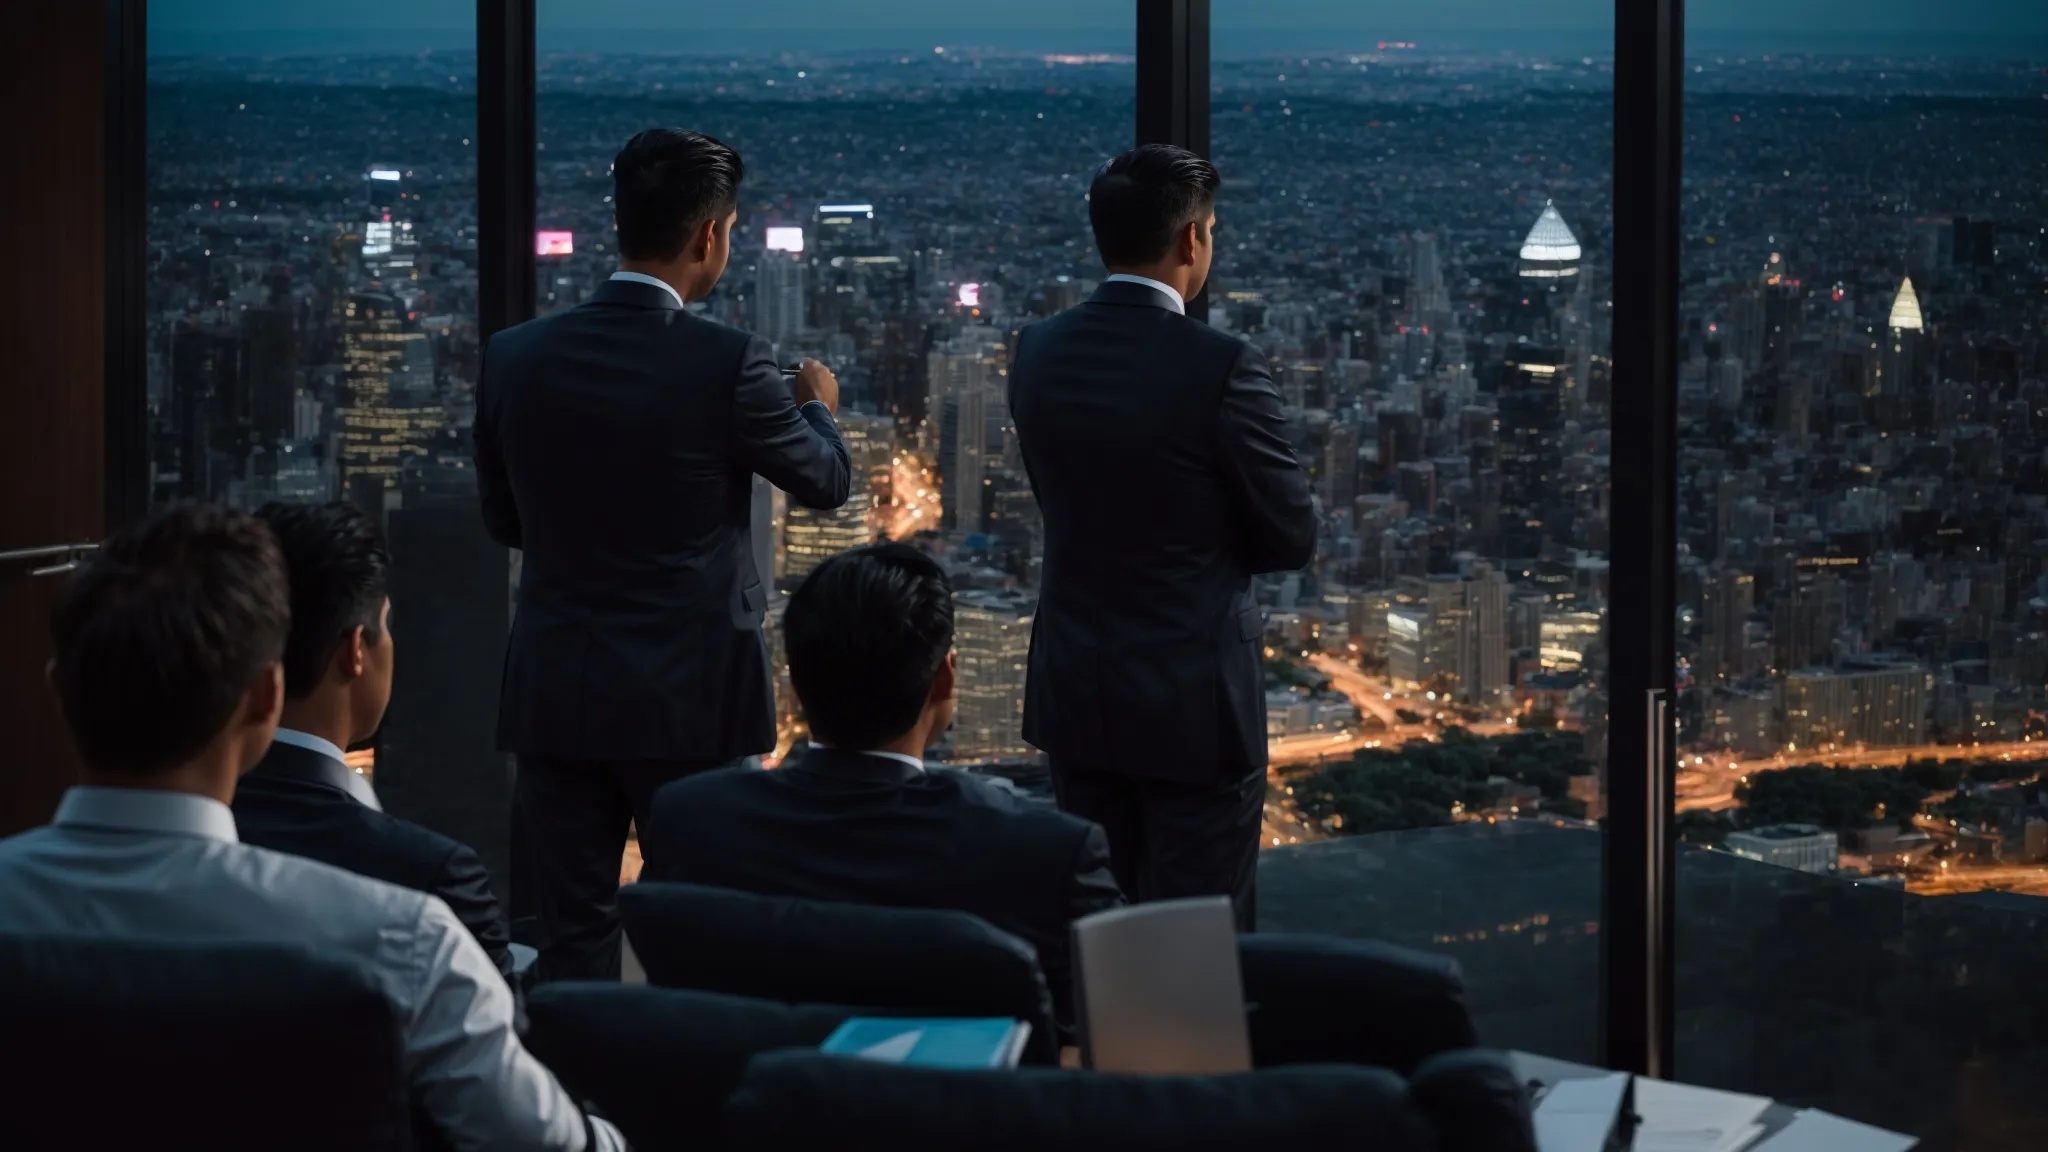 a group of business professionals engaged in a strategic meeting overlooking a city skyline at dusk concerning ISDIS reform.